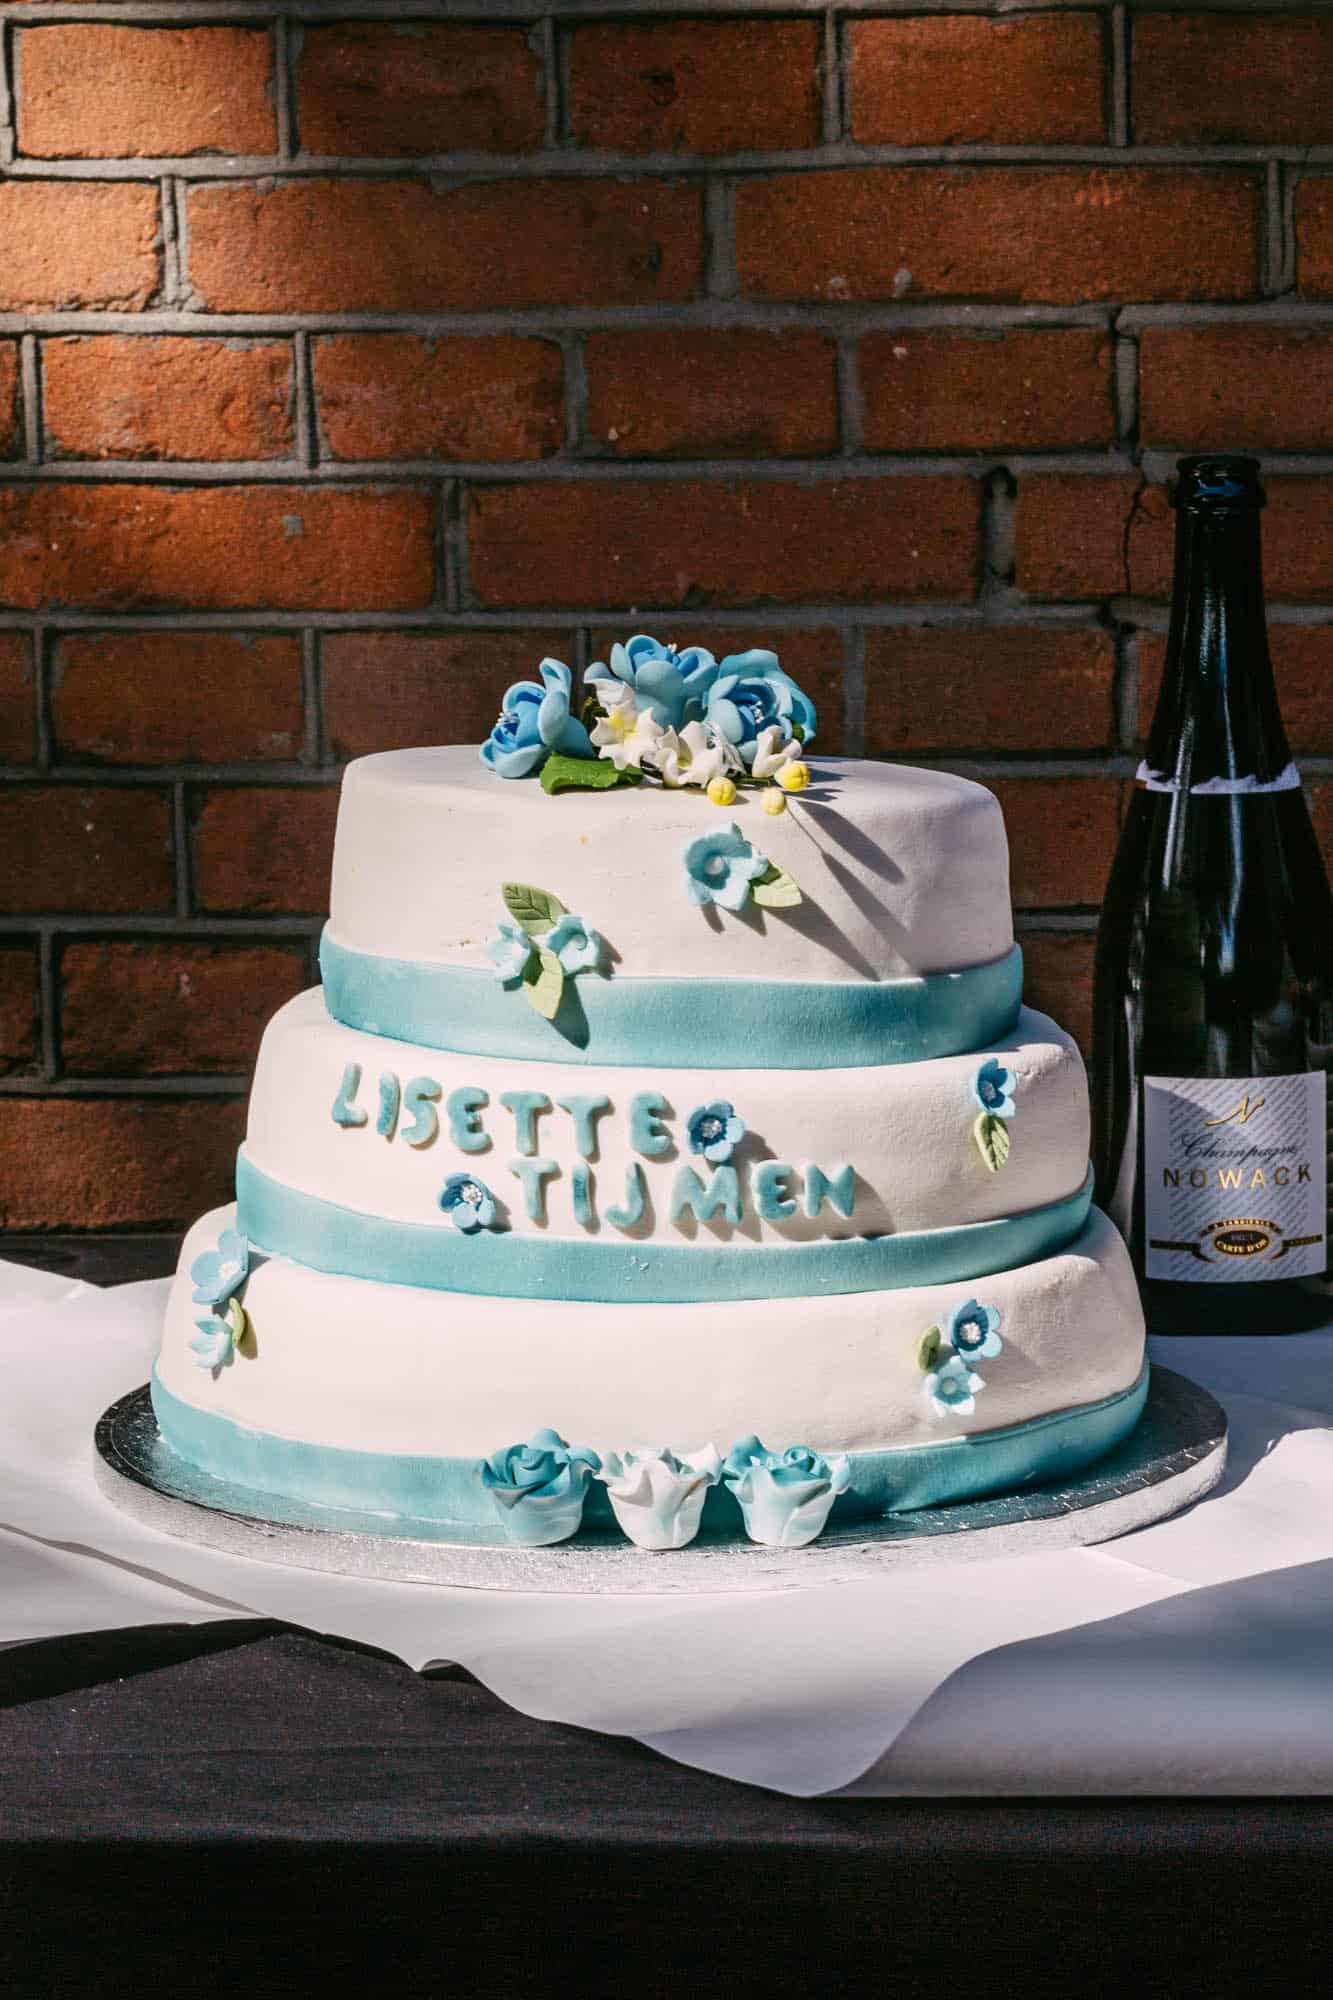 Description: A wedding cake with blue flowers and a bottle of champagne.